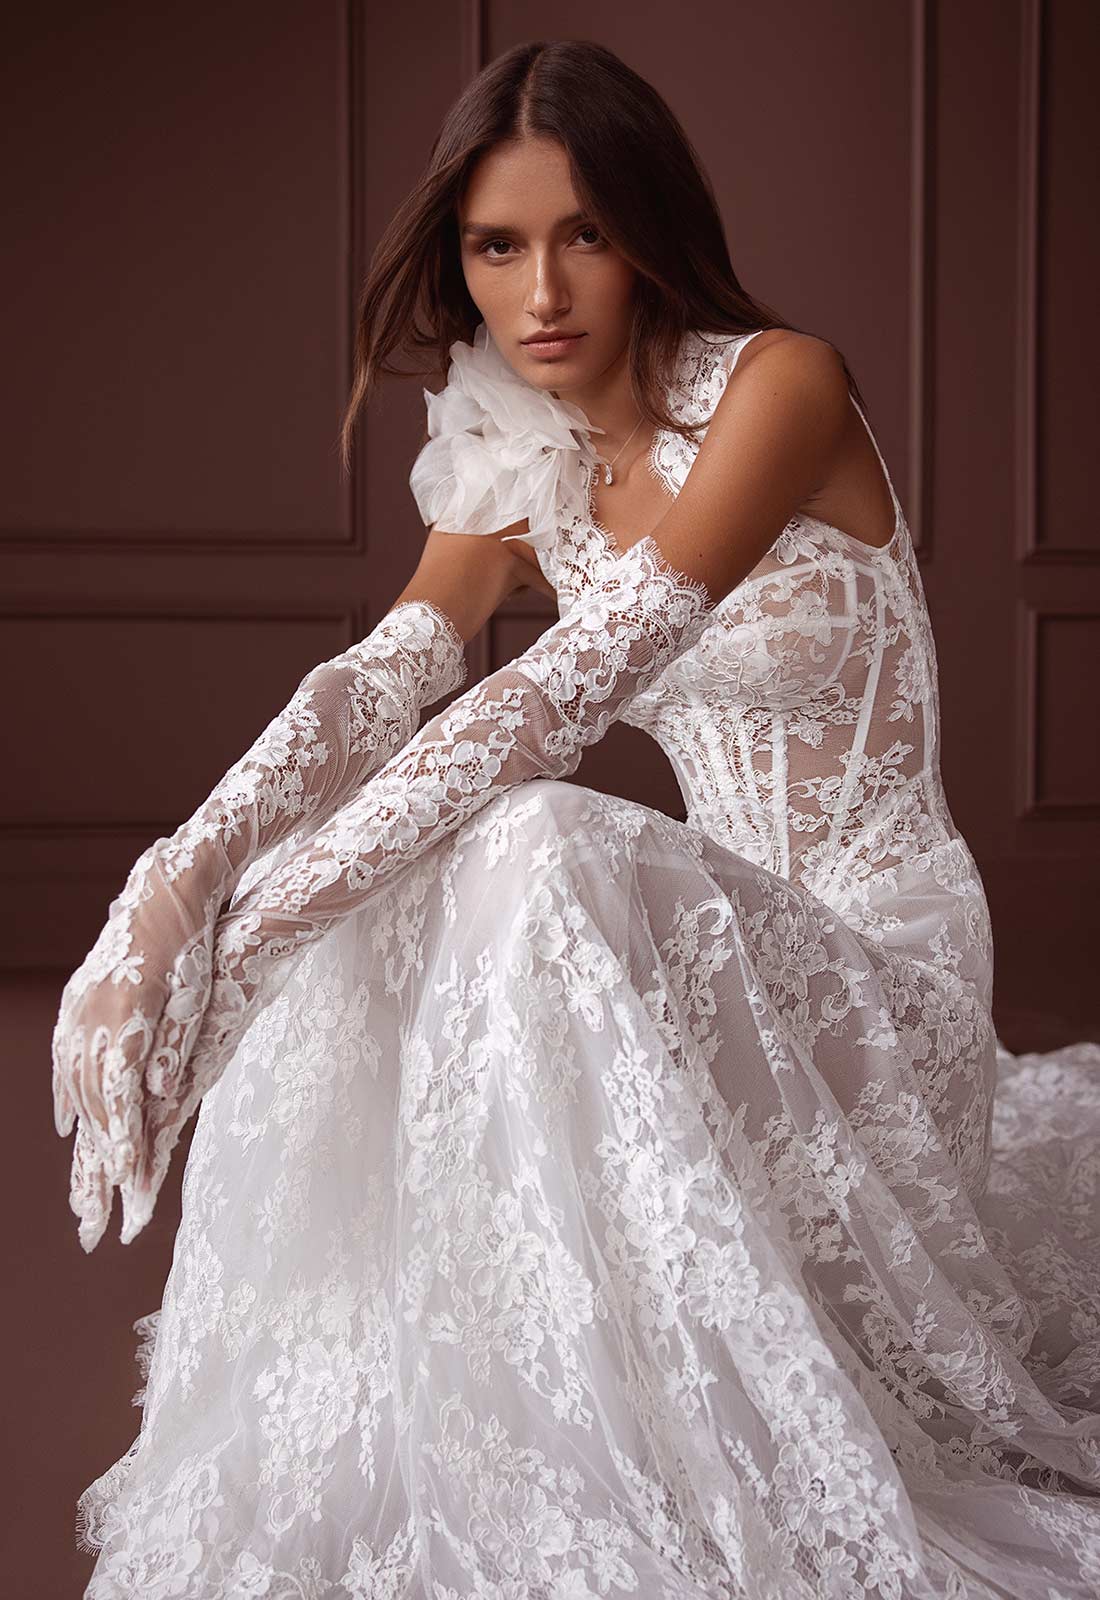 Trending Lace Gown Styles For Ladies In 2023 • Exquisite Magazine